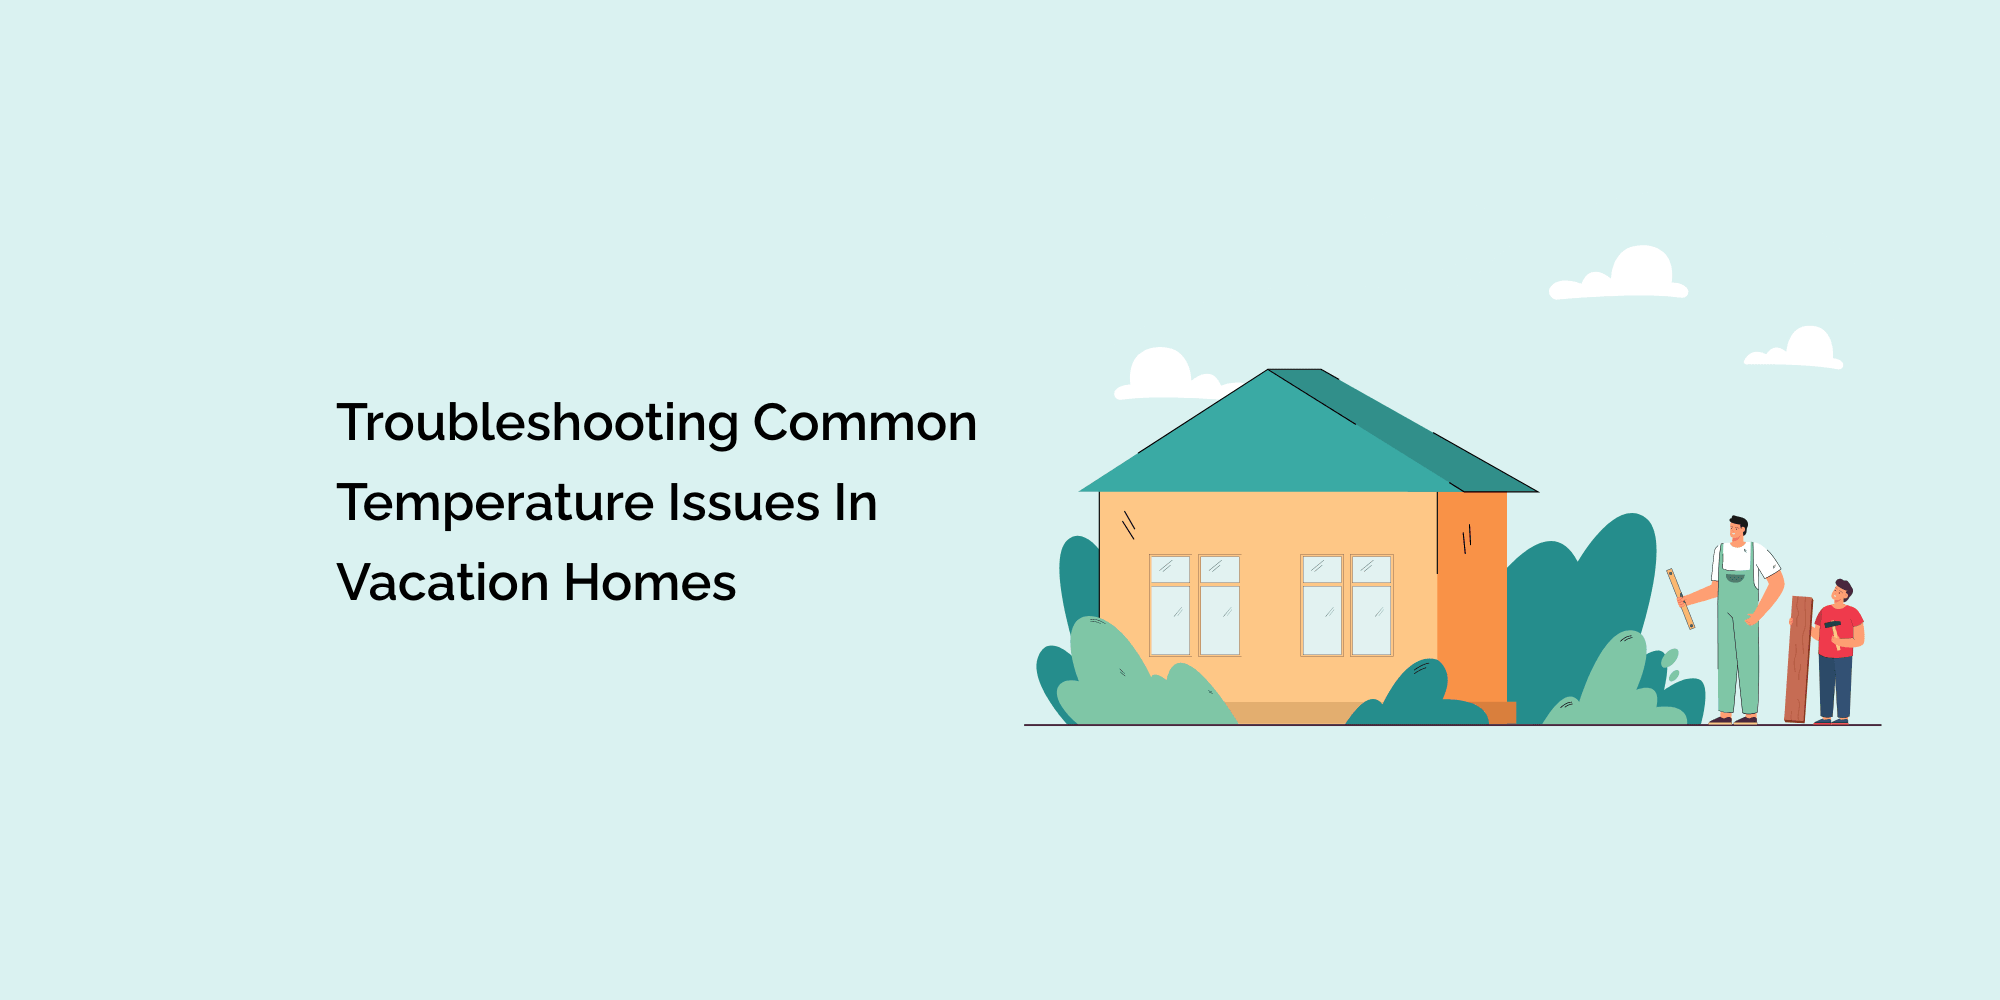 Troubleshooting Common Temperature Issues in Vacation Homes